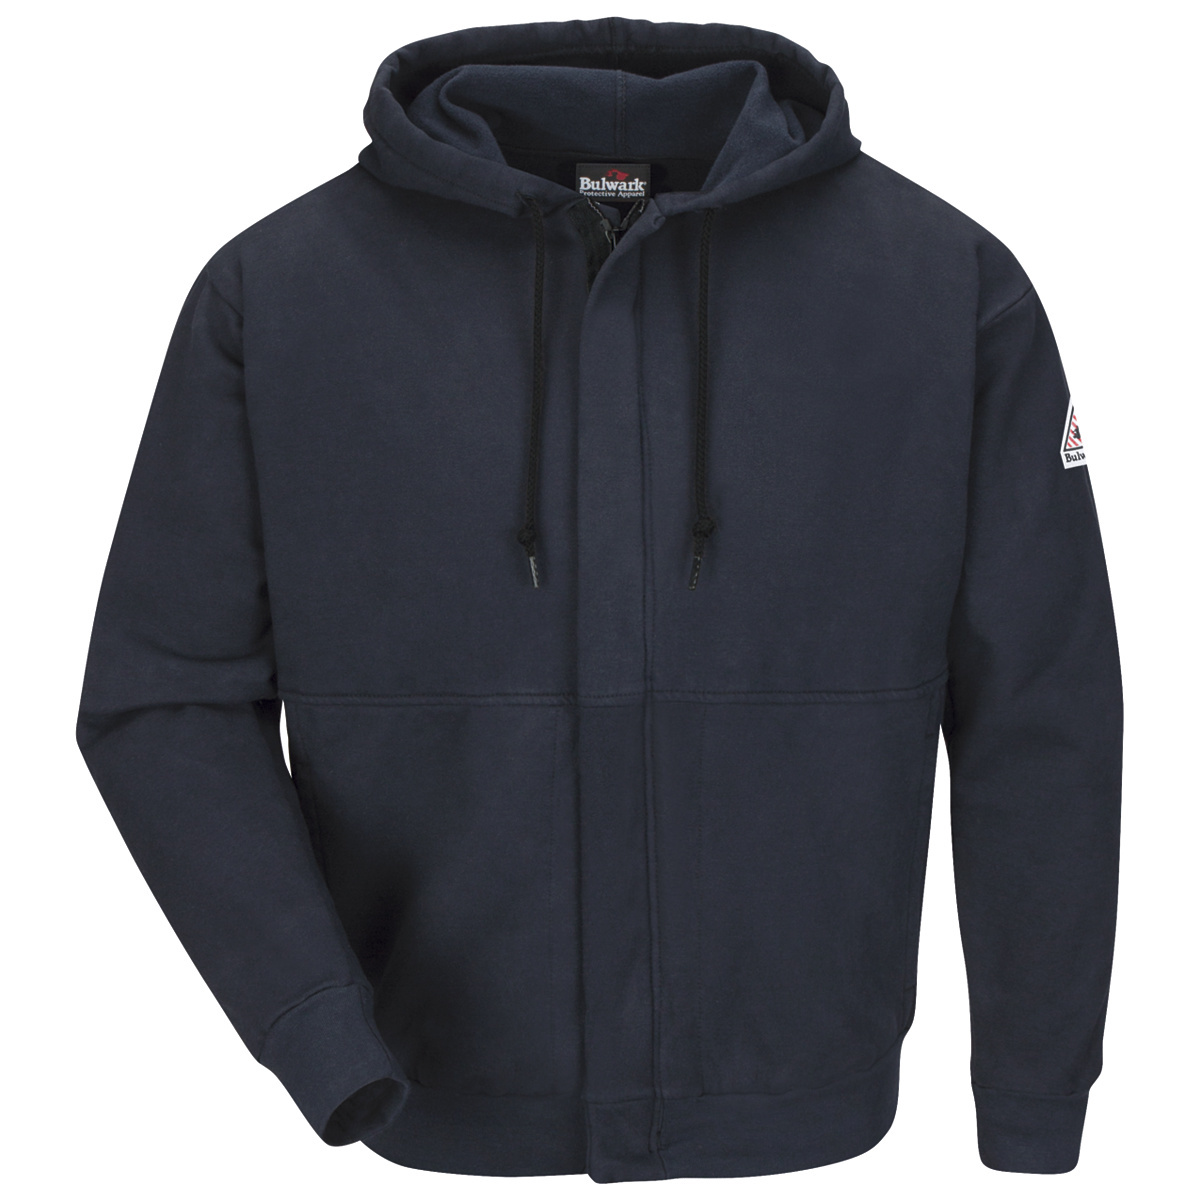 Bulwark® 2X Tall Navy Blue Cotton/Spandex Brushed Fleece Flame Resistant Hooded Sweatshirt With Zipper Front Closure